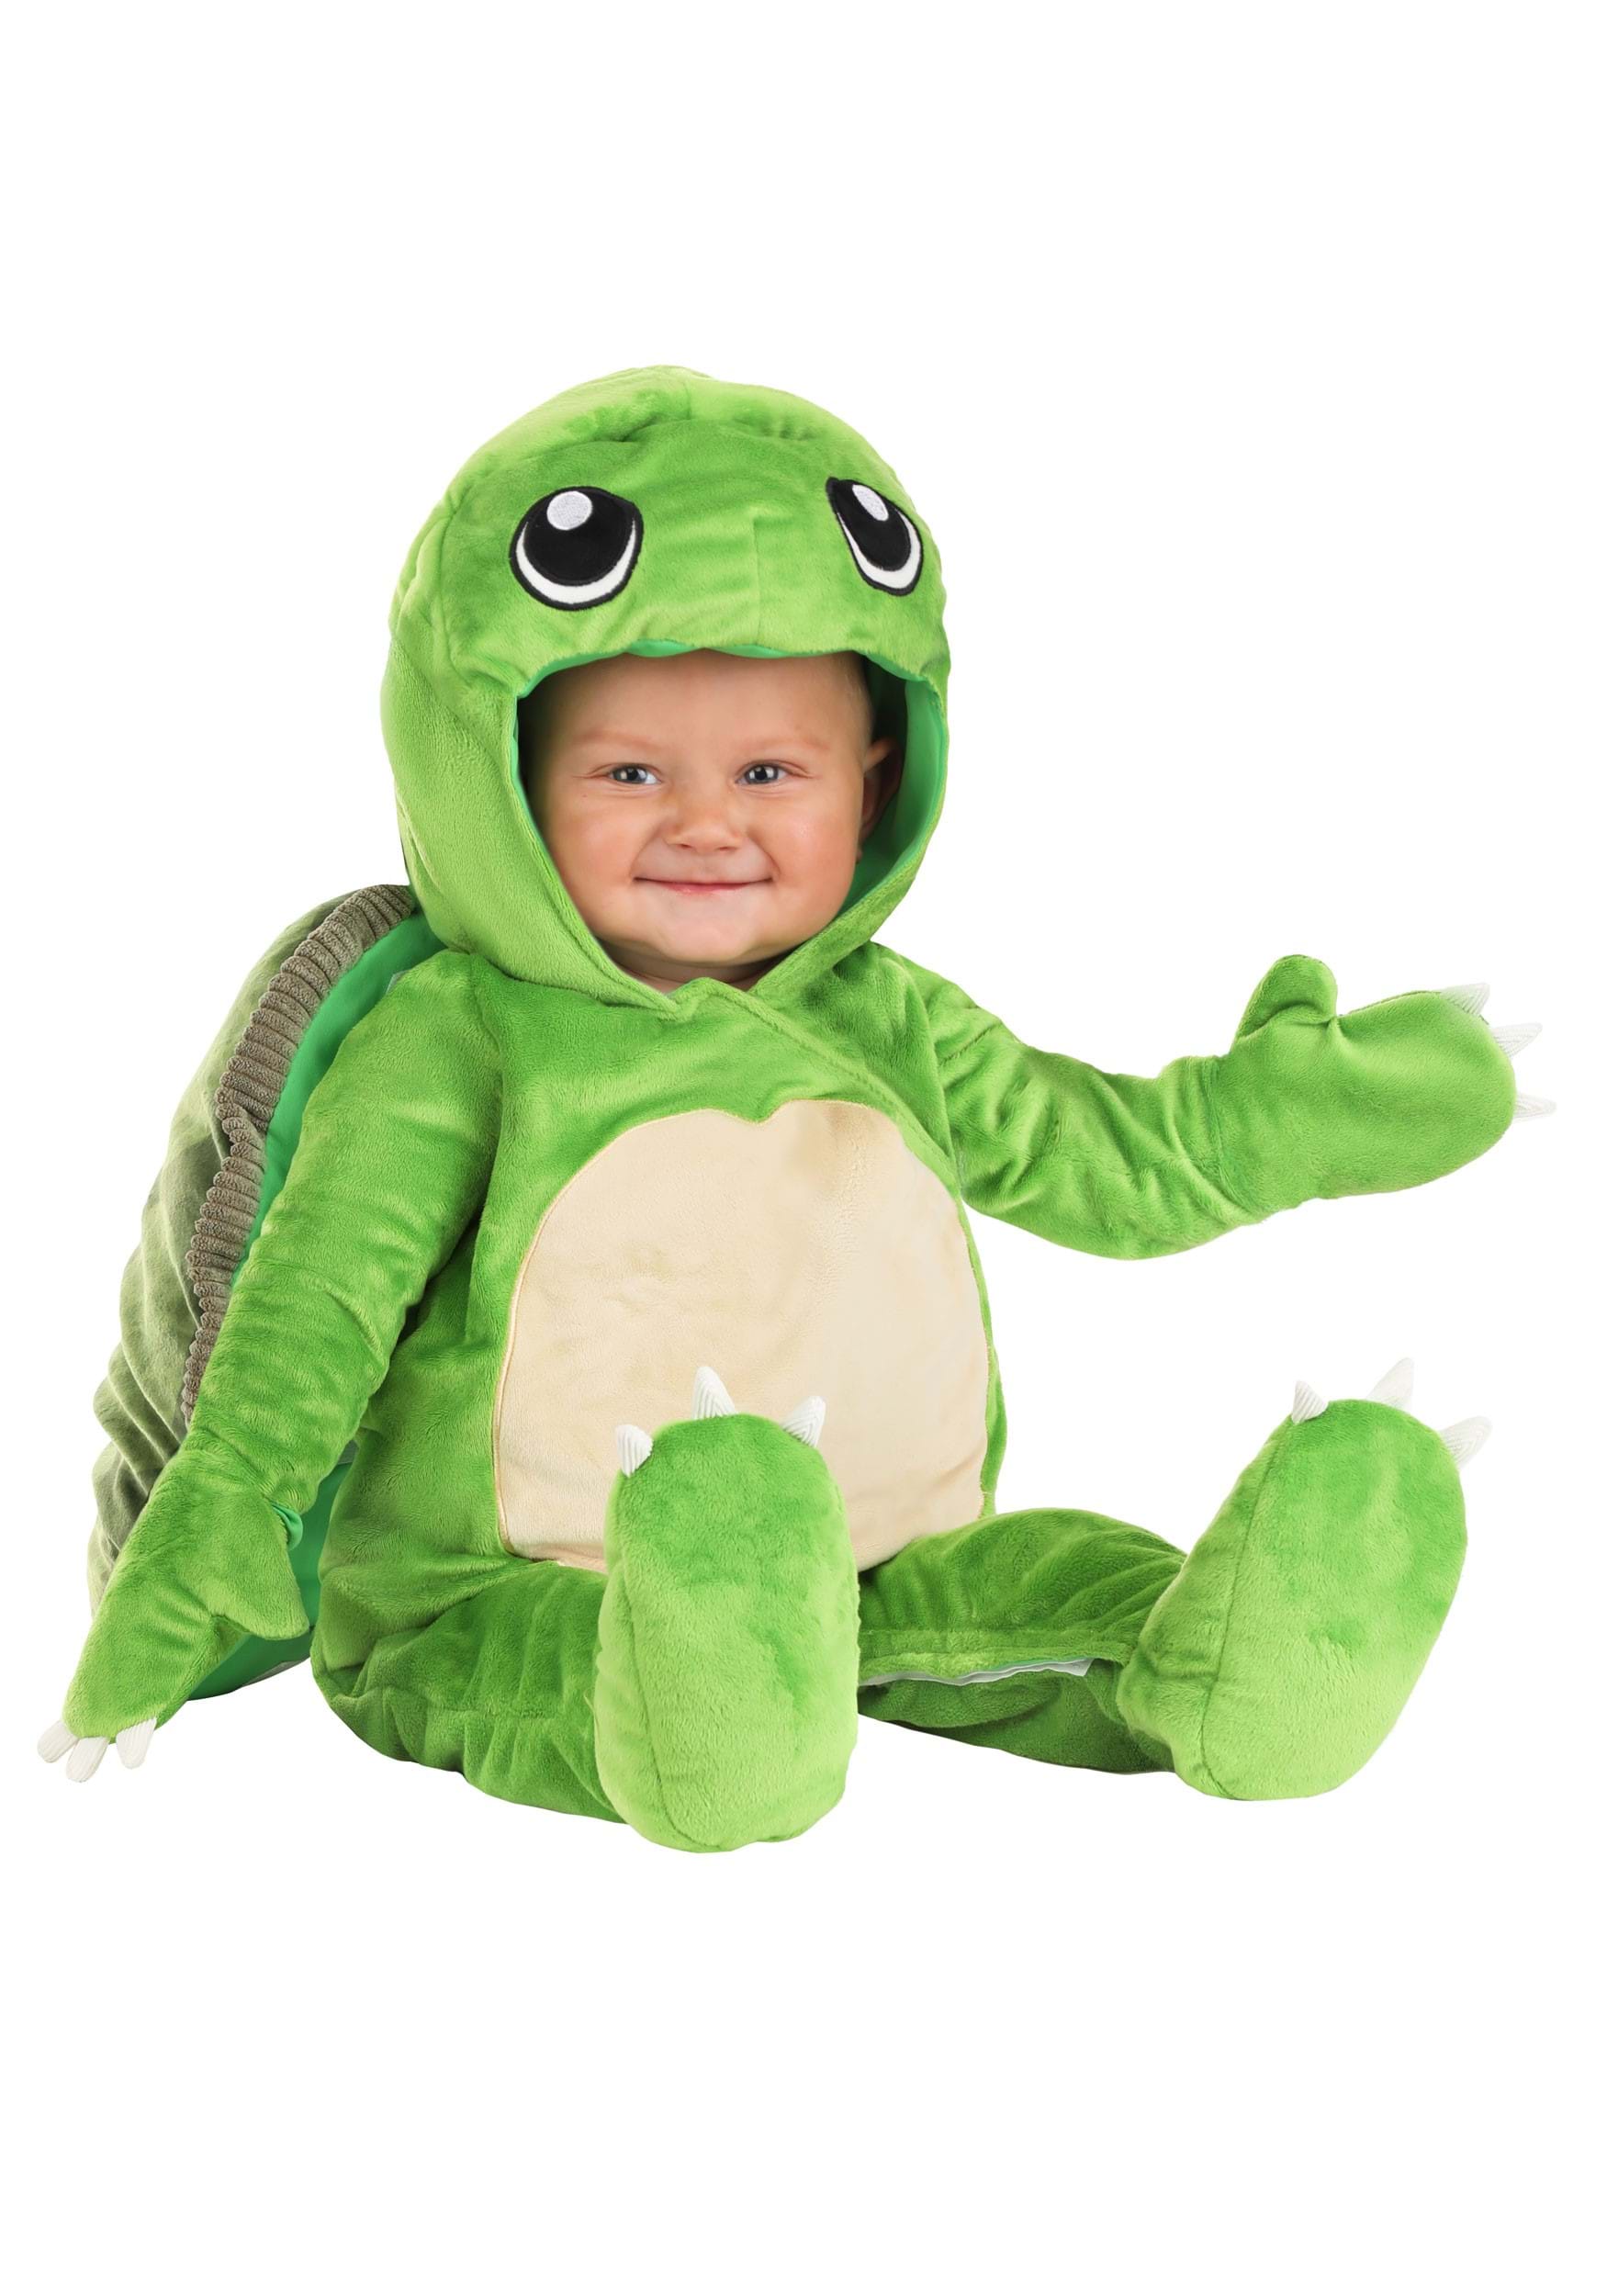 Baby Movie Turtle  The Prop Shop Costumes and More!